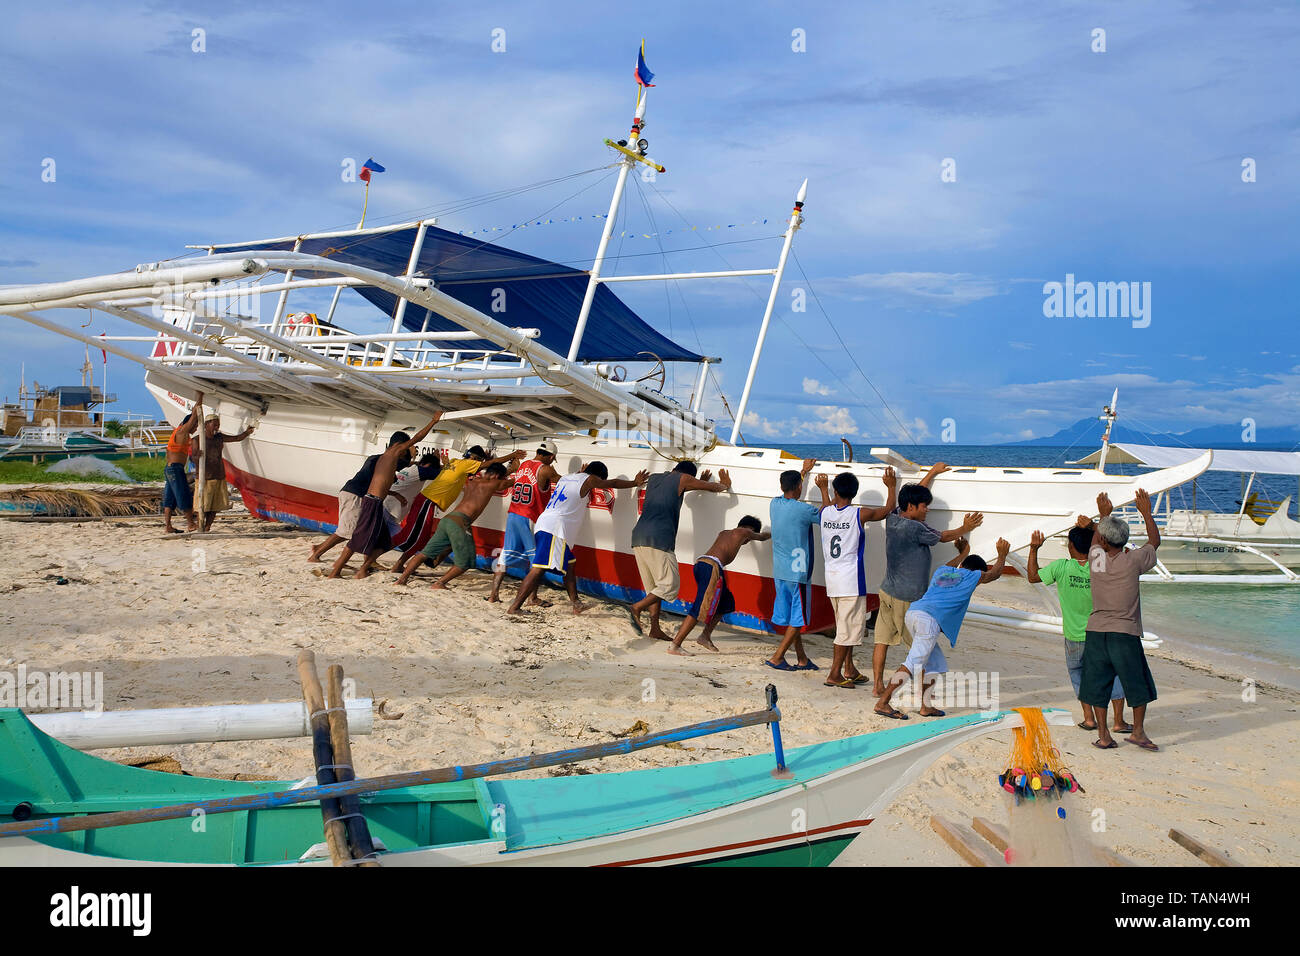 Fishermen pushing a traditional fishing boat after maintanance from the beach to the ocean, Bounty beach, Malapascua island, Cebu, Philippines Stock Photo